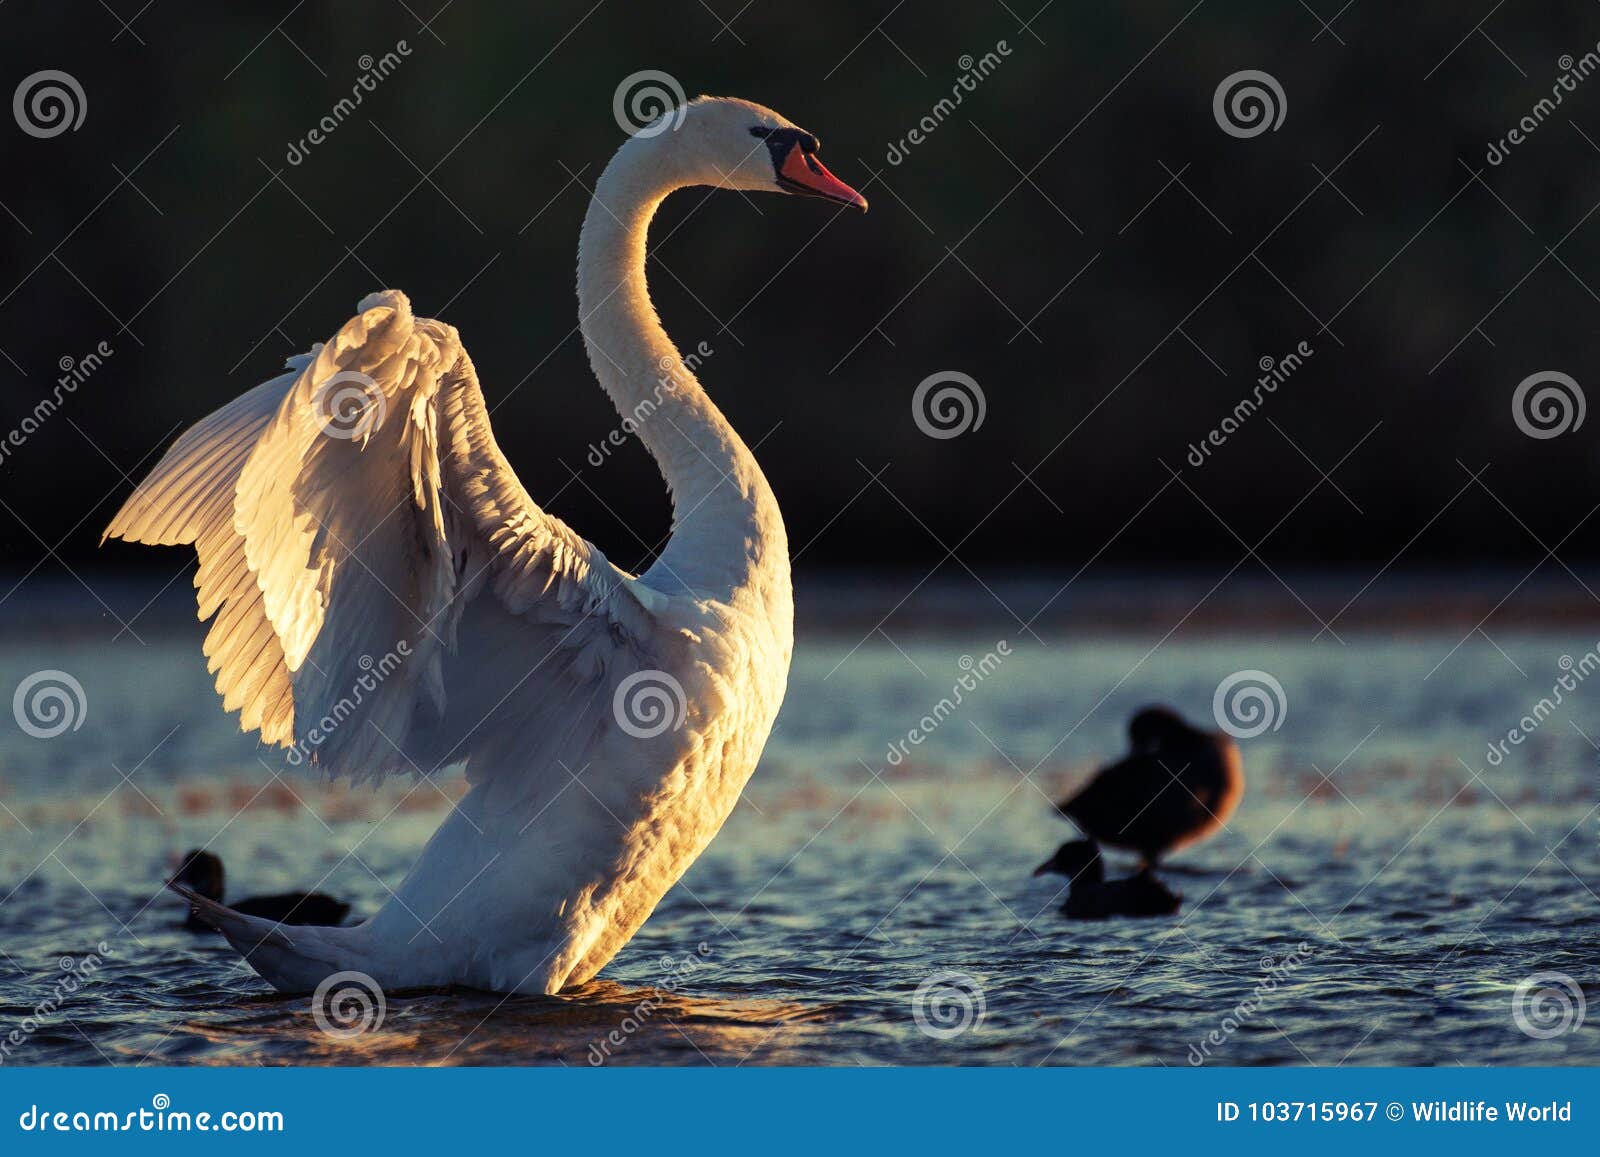 Swan with Open Wings. in the Beautiful Evening Light Stock Image ...